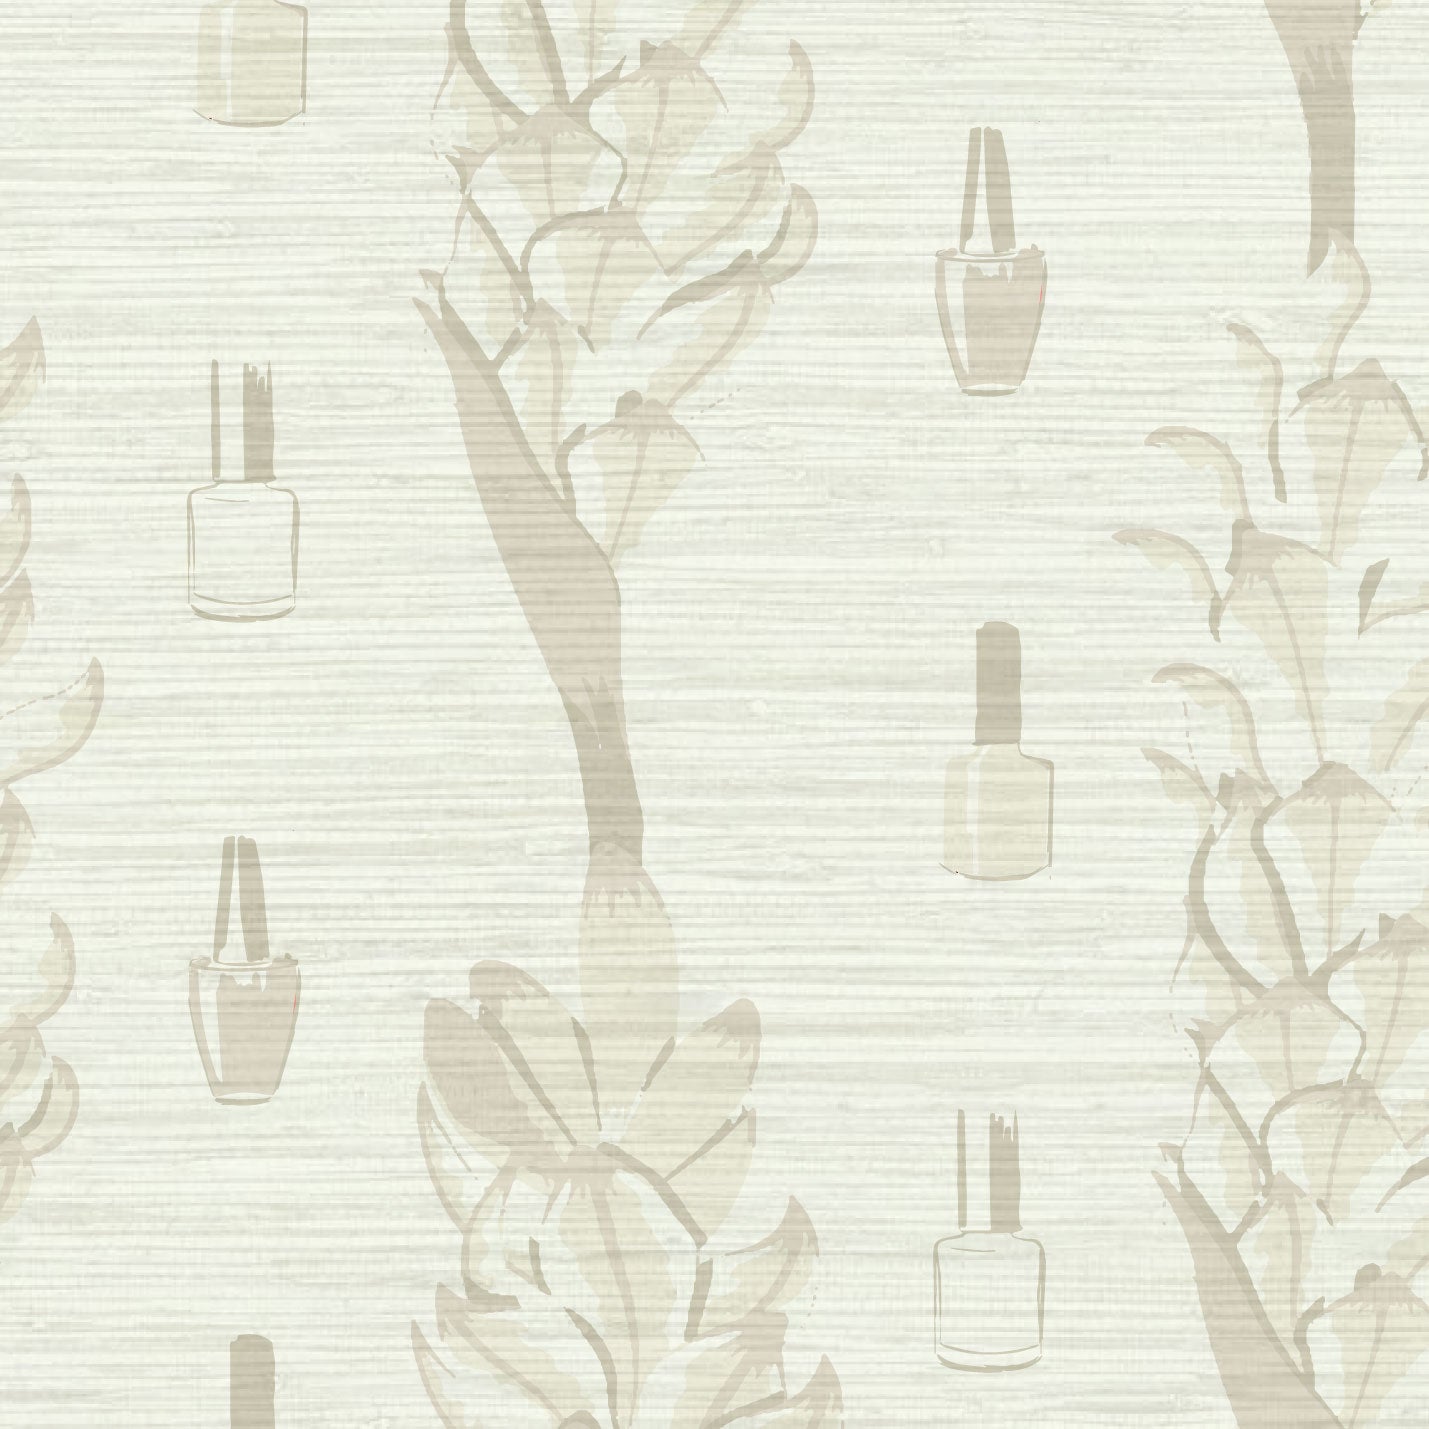 tan based grasscloth wallpaper printed with tonally darker nail polish bottles laid out in vertical stripes in between rows of floral vines of flowers